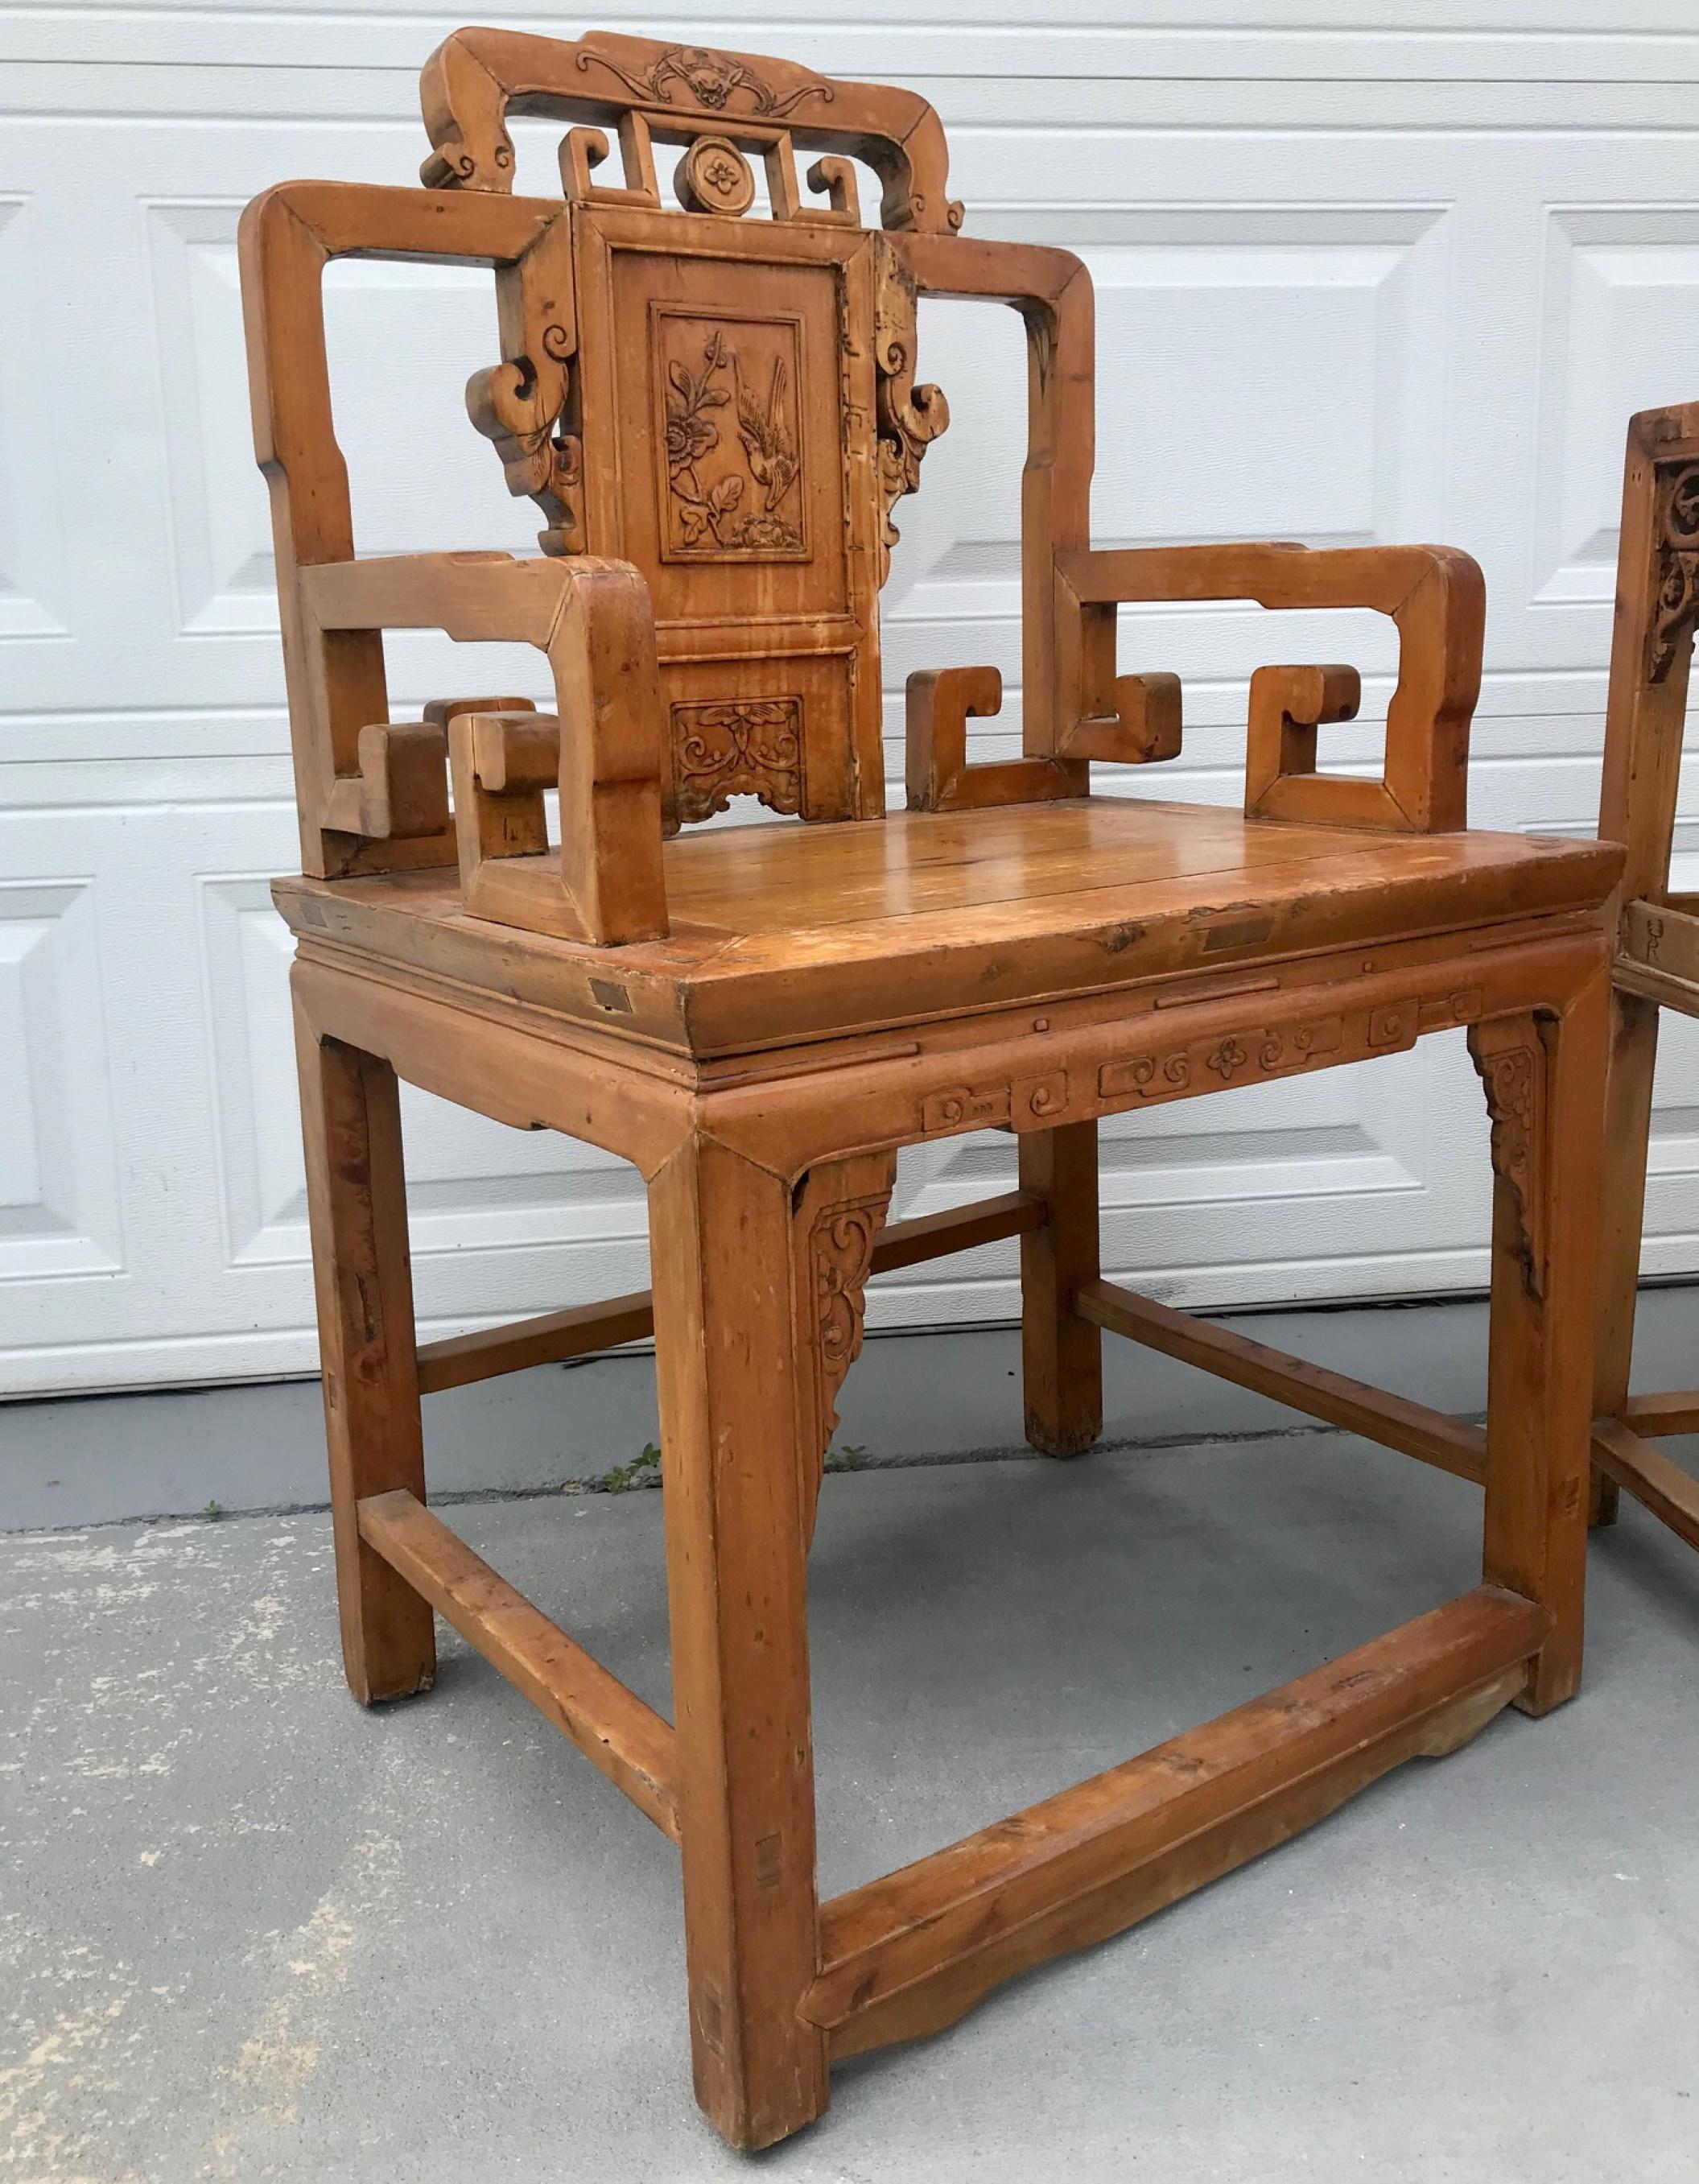 3-piece set of Qing dynasty armchairs and table.

These authentic antique Chinese hand carved screen back armchairs are masterpieces of Qing dynasty furniture. The chairs feature an Archaistic key motif. They are elegant and simple in style. Built